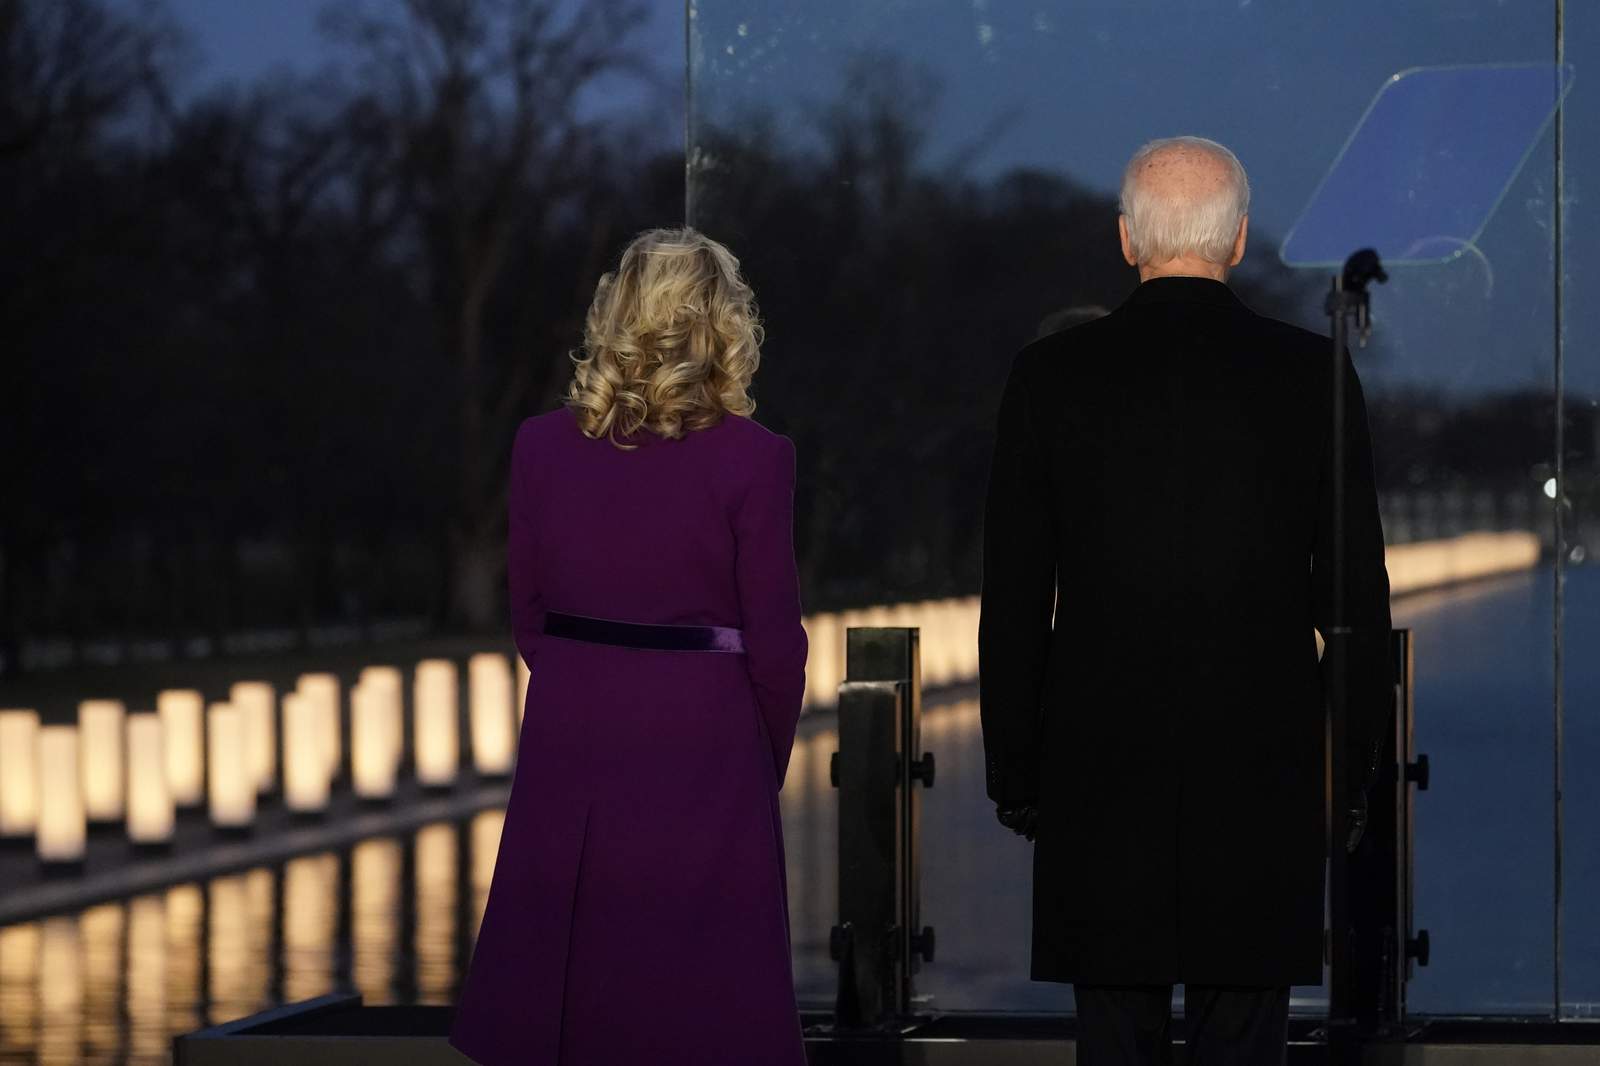 Biden marks nation's Covid grief before inauguration pomp